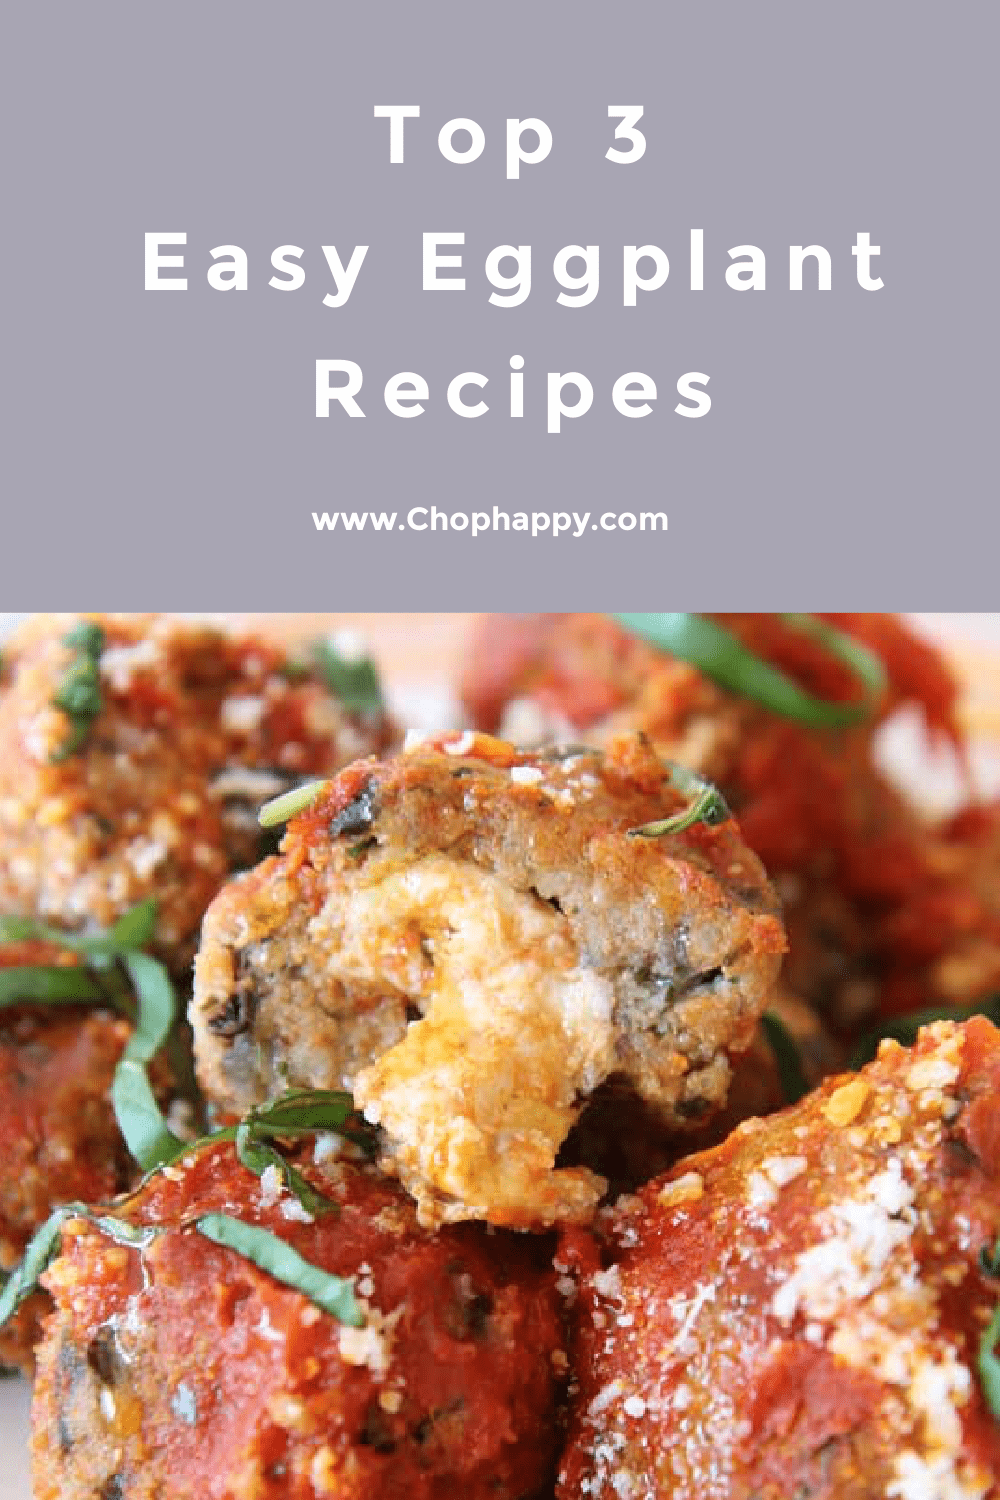 Top 3 Easy Ways To Make Eggplant Recipes. Eggplant is a versatile ingredient for busy weeknight dinners and lots of leftovers. Happy Cooking! www.ChopHappy.com #eggplantrecipes #eggplant